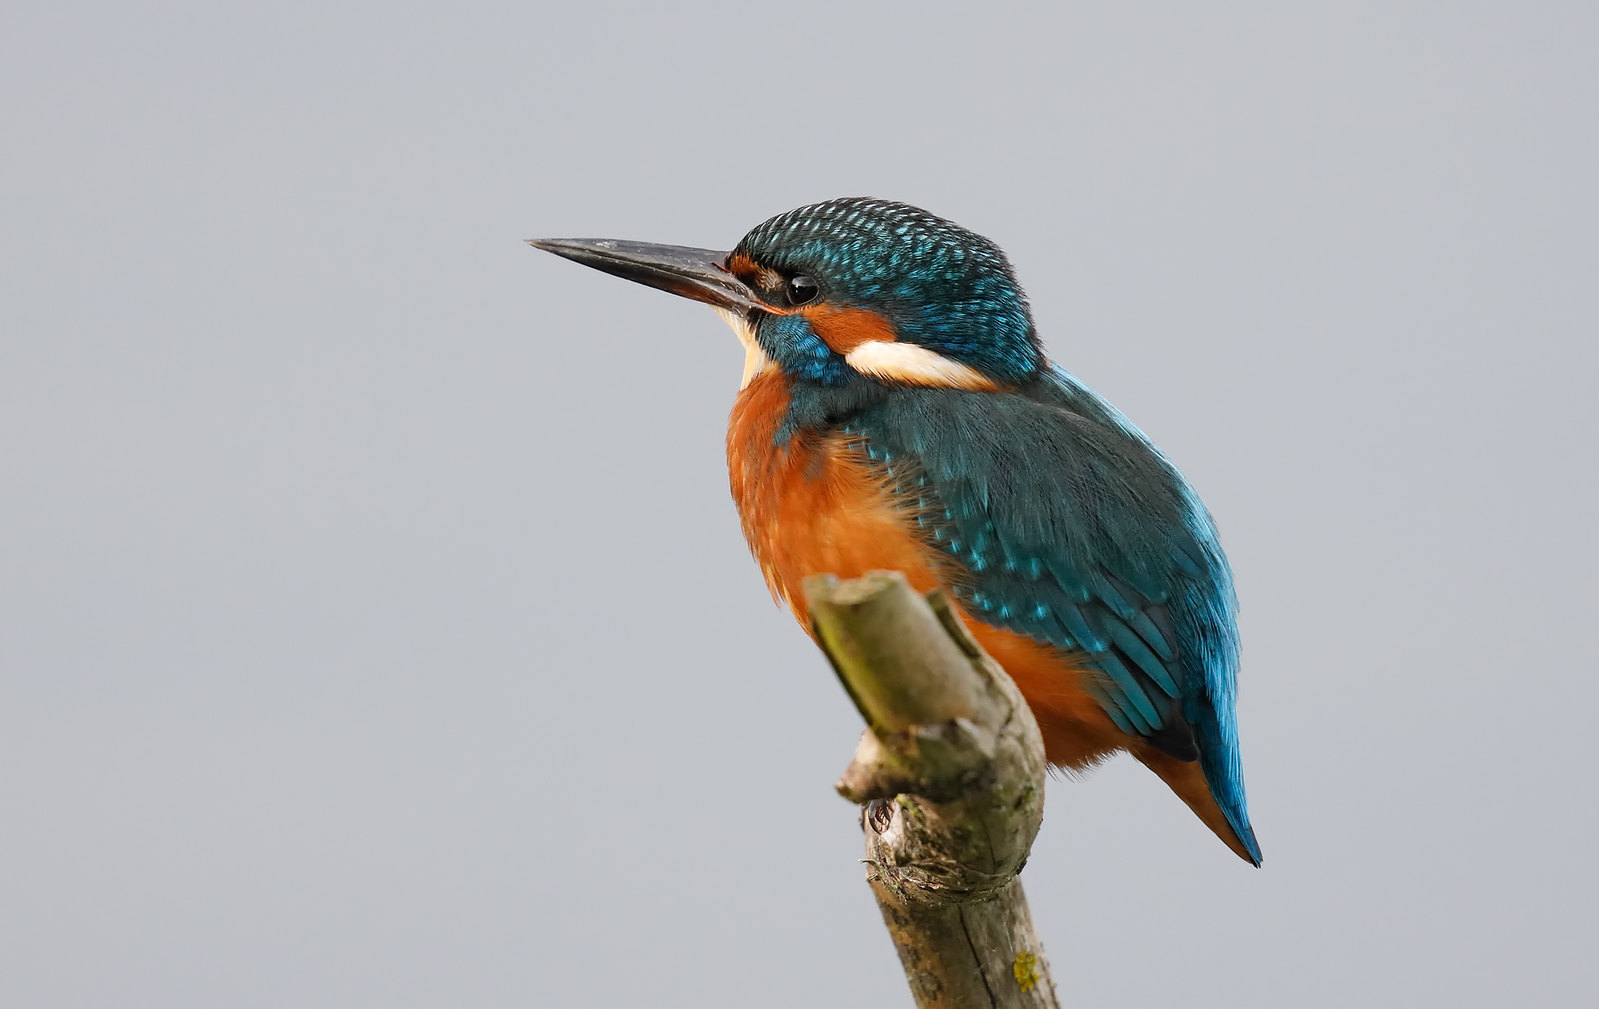 Kingfisher session